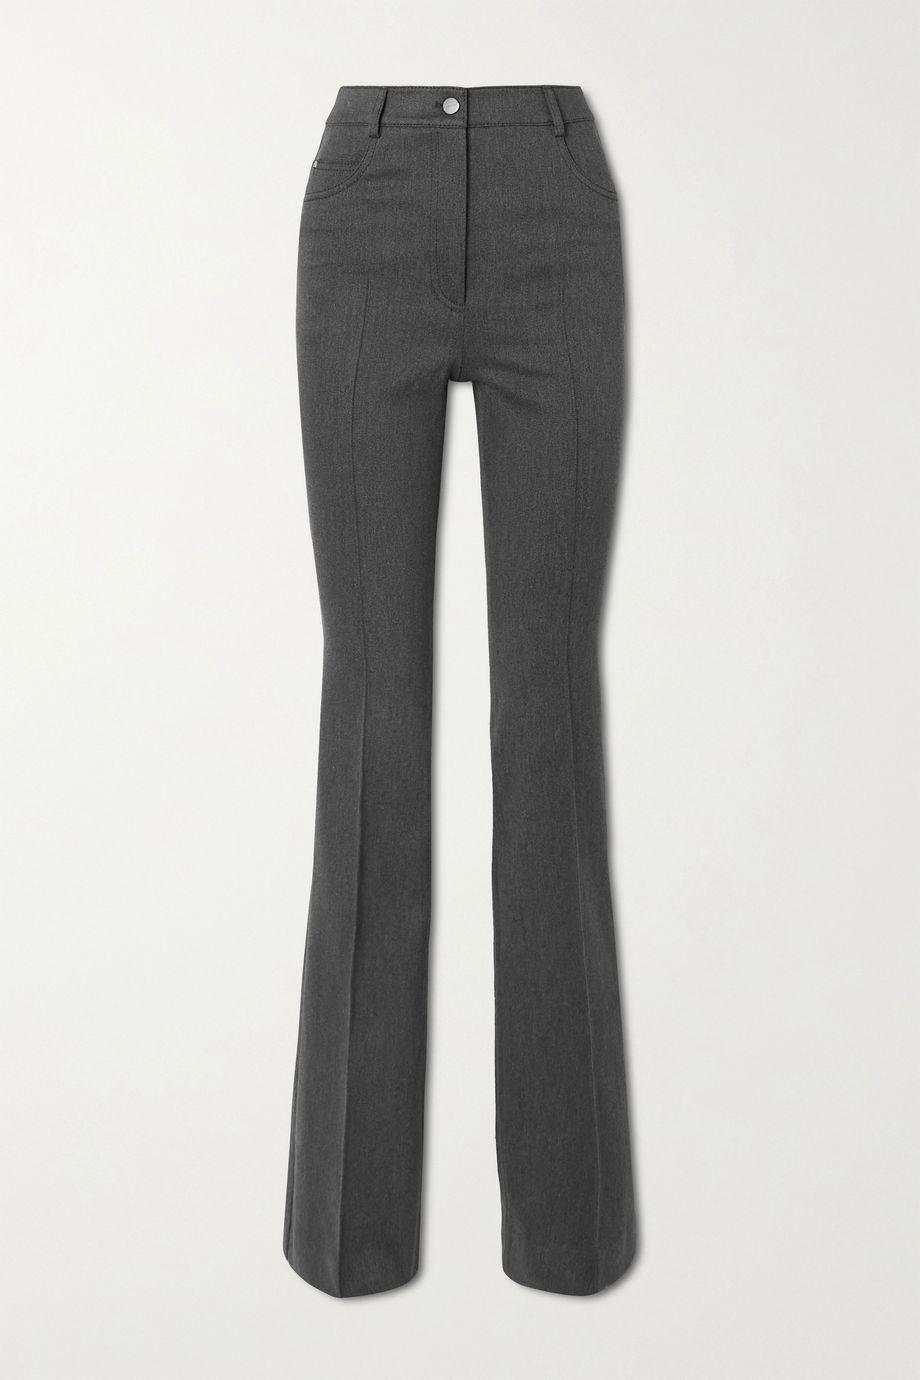 Farid cotton-blend twill flared pants by AKRIS